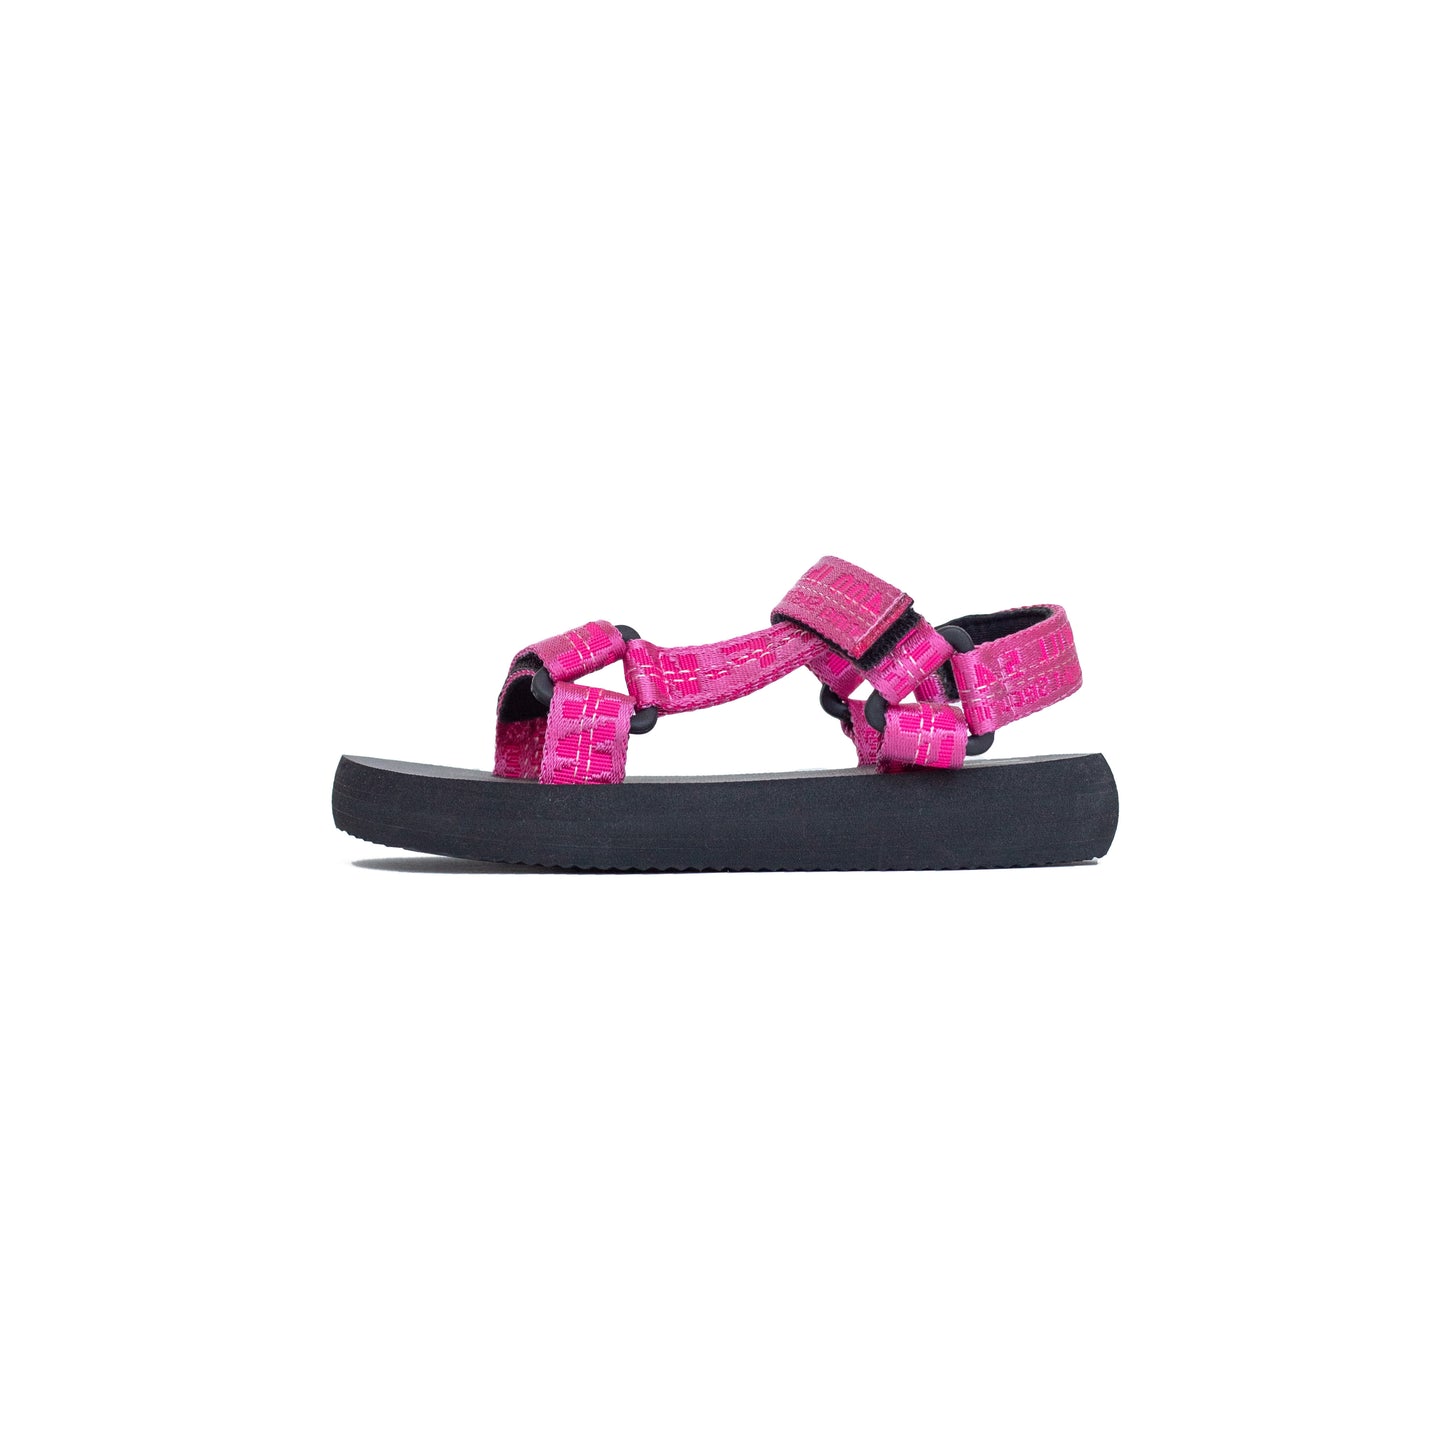 Touch Strap Sandals Side